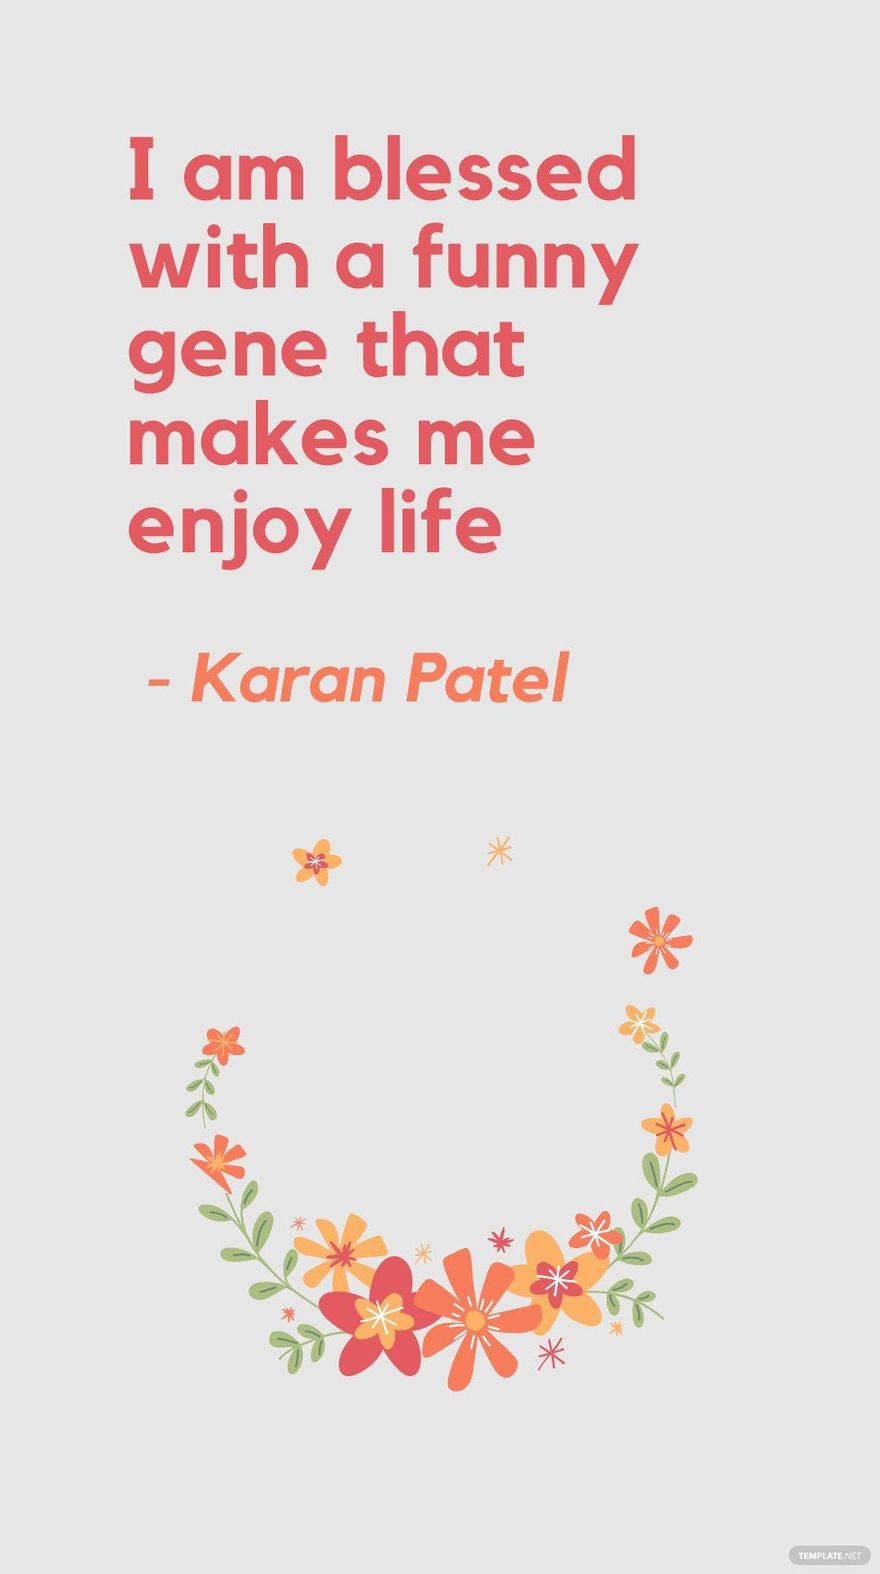 Free Karan Patel - I am blessed with a funny gene that makes me enjoy life in JPG